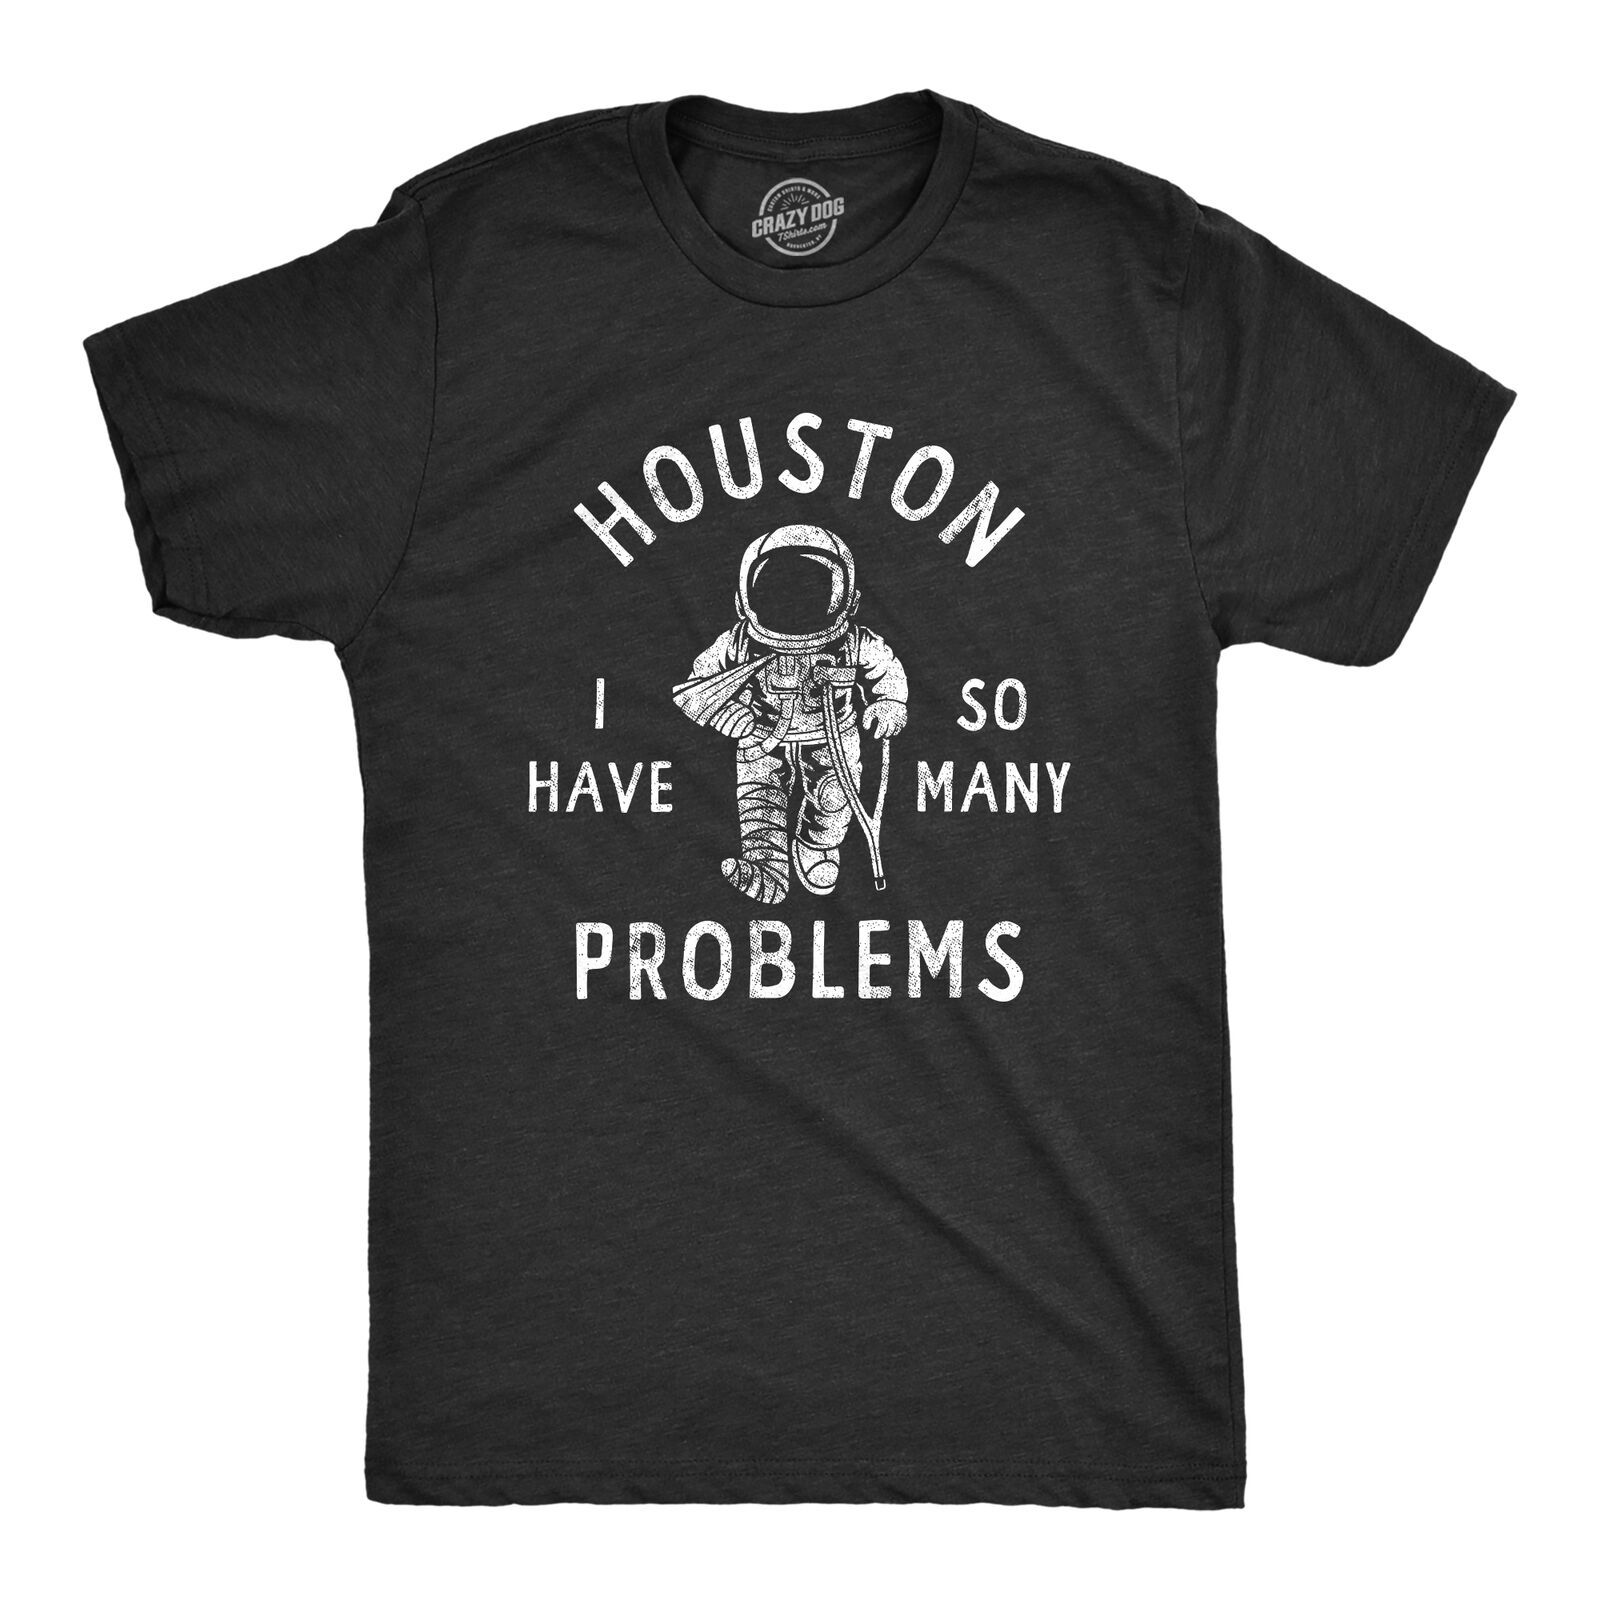 Mens Houston I Have So Many Problems T Shirt Funny Sarcastic Astronaut Space